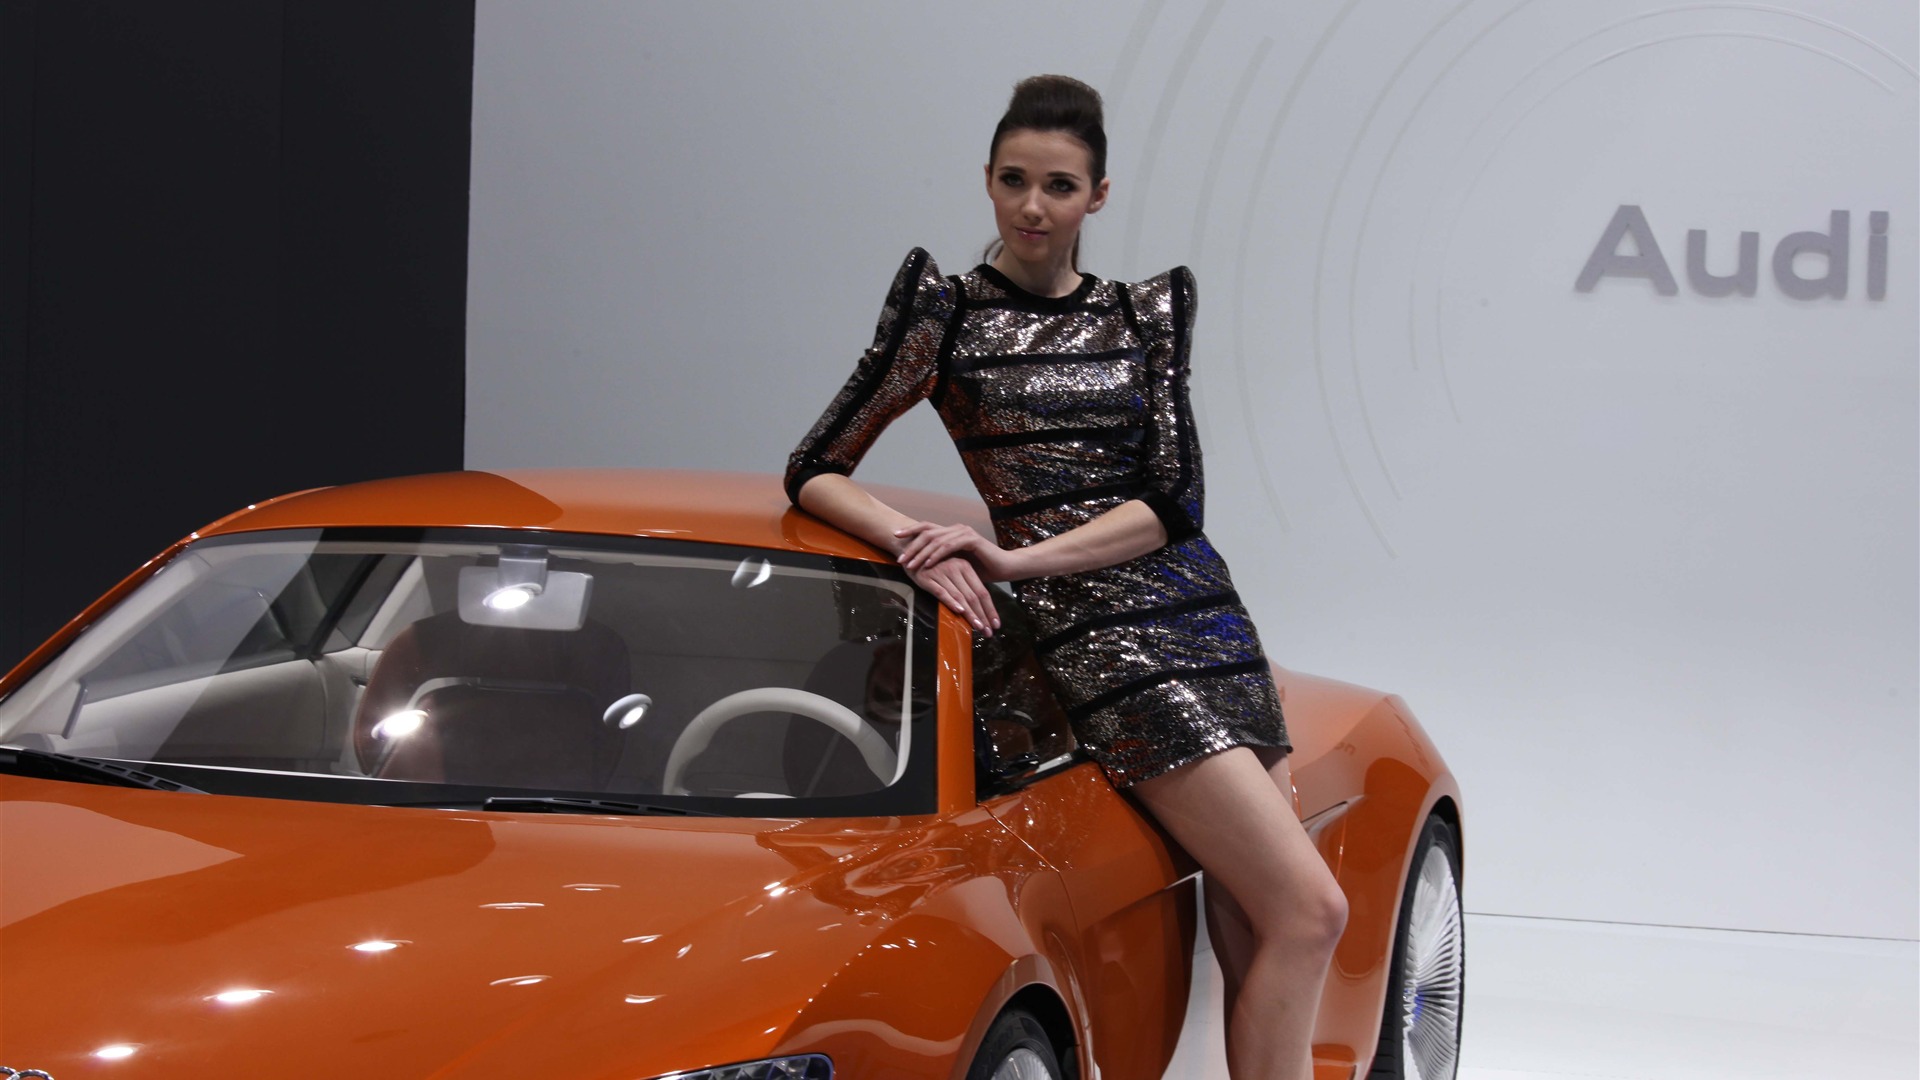 2010 Beijing International Auto Show beauty (2) (the wind chasing the clouds works) #5 - 1920x1080